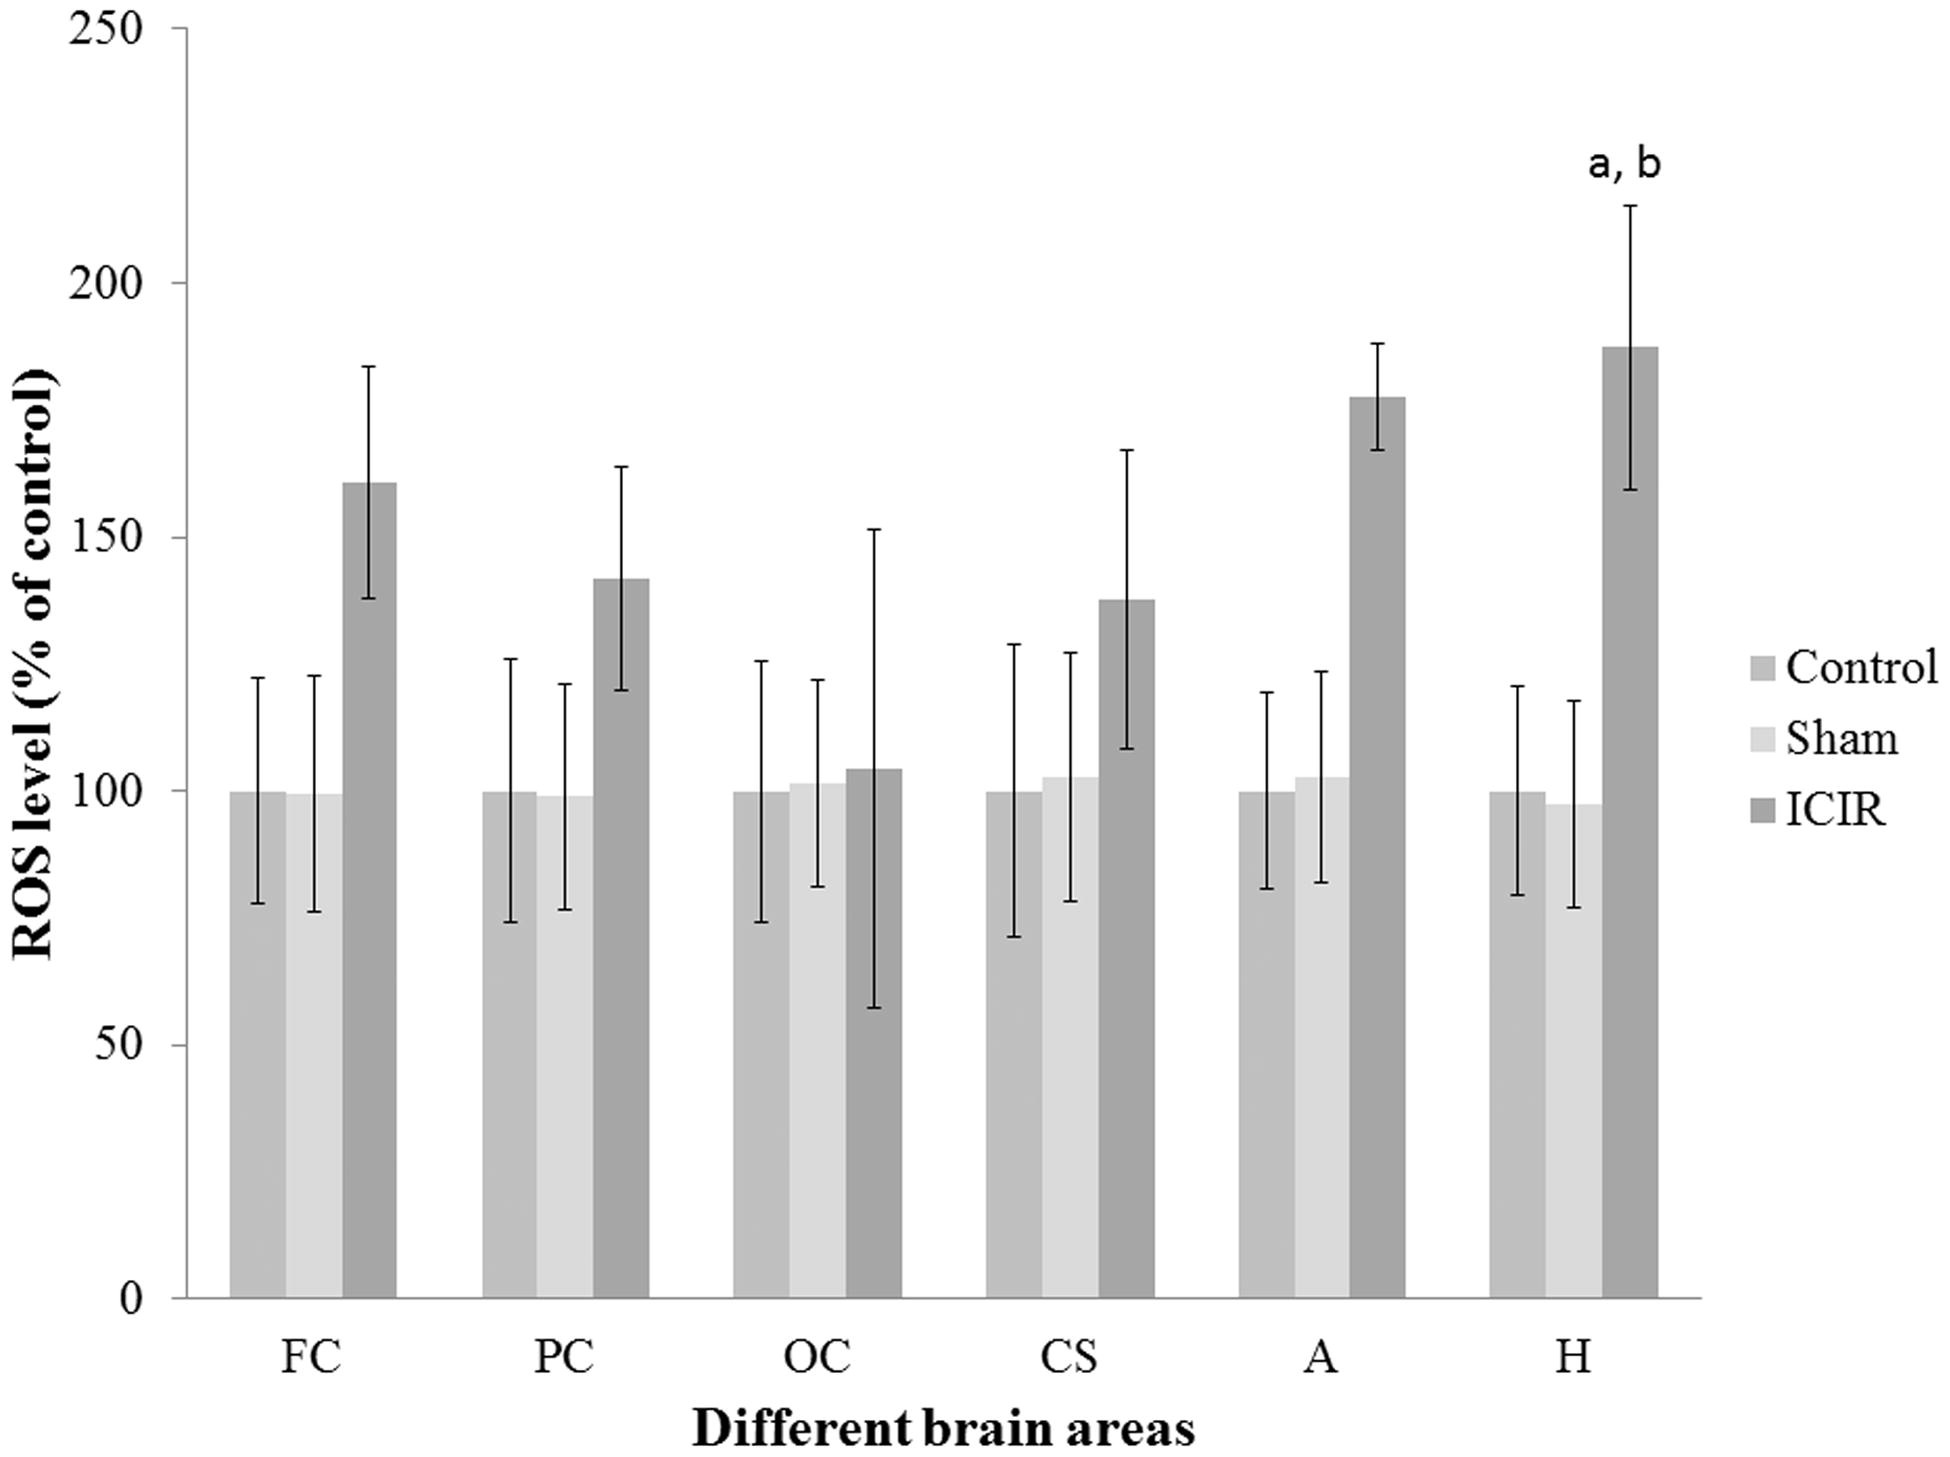 Figure 9. ROS levels in different brain areas of rats. (a) Significant difference (p < 0.001) between hippocampus levels in C and S rats vs in ICIR hosts. (b) Significant difference (p < 0.001) between hippocampus vs amygdala, frontal cortex, parietal cortex, occipital cortex and corpus striatum in ICIR hosts. Values shown are means ± SEM (n = 6/group). Abbreviations are as outlined in legend to Figure 3.